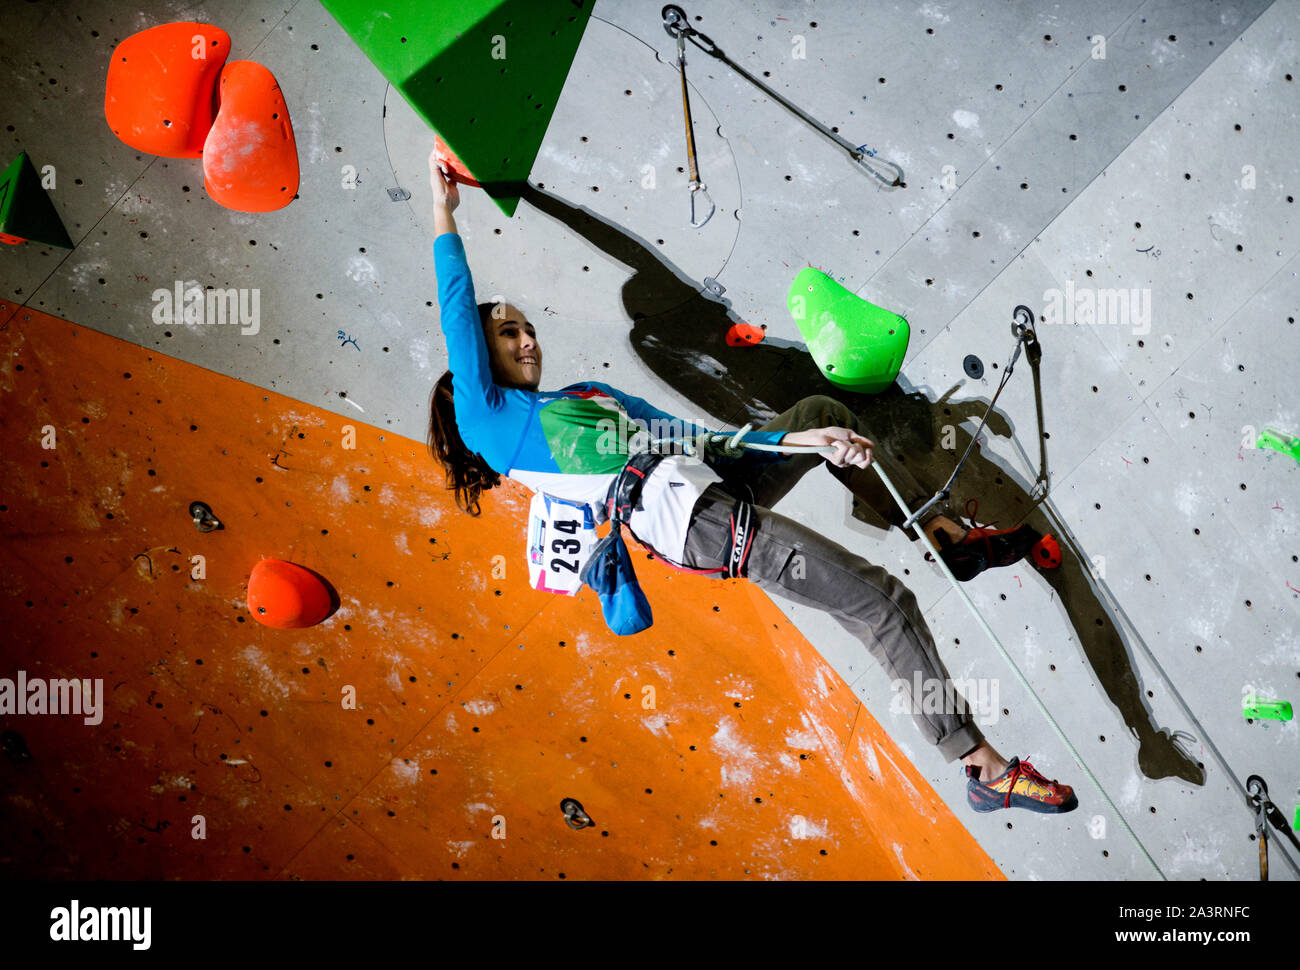 Laura Rogora of Italy competes in the Lead climbing womans Final on at the IFSC Climbing World Championships at the Edinburgh International Climbing A Stock Photo